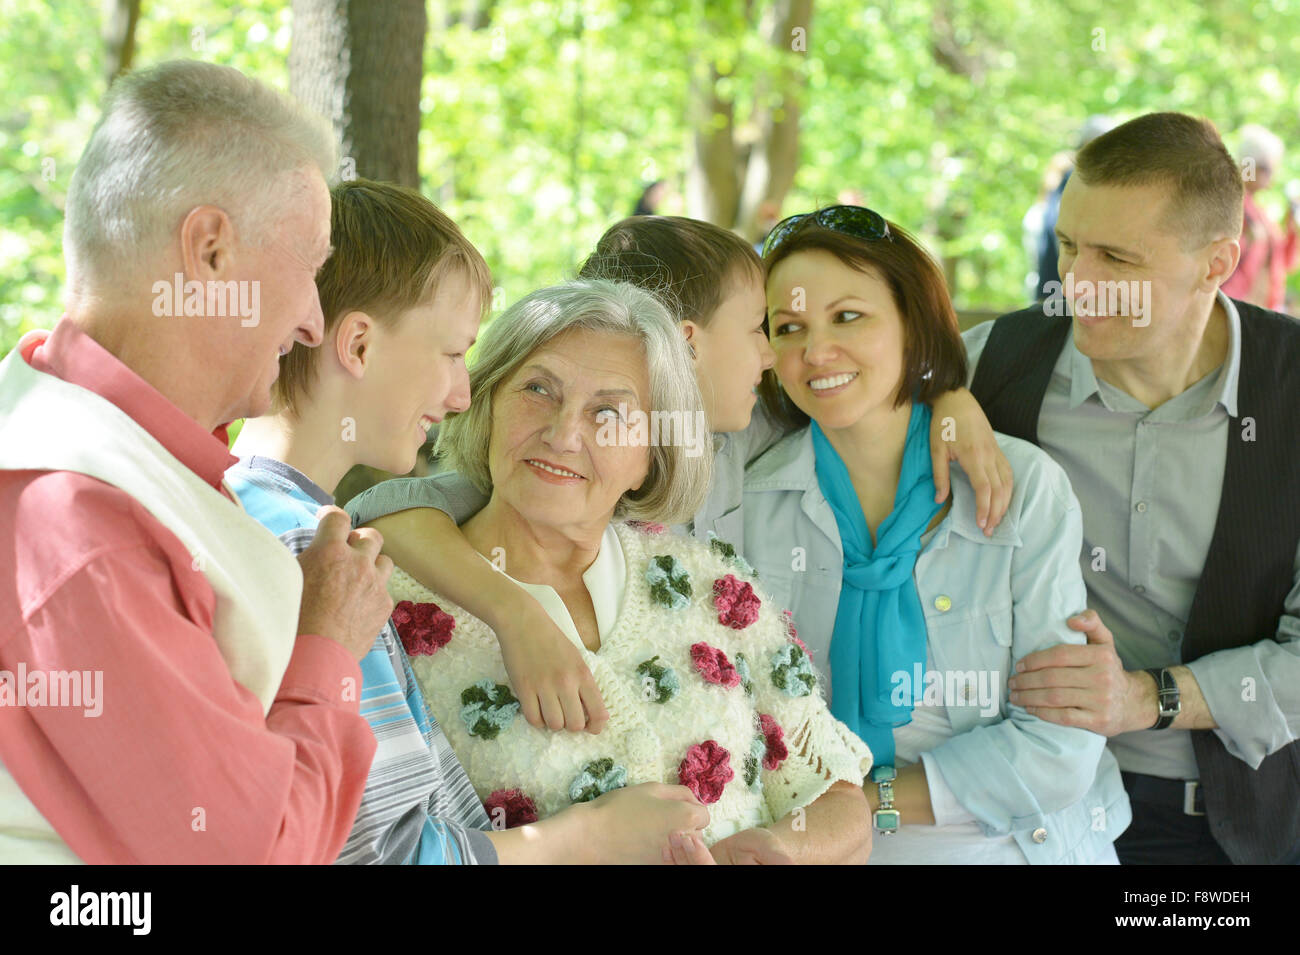 Family relaxing in summer park Stock Photo